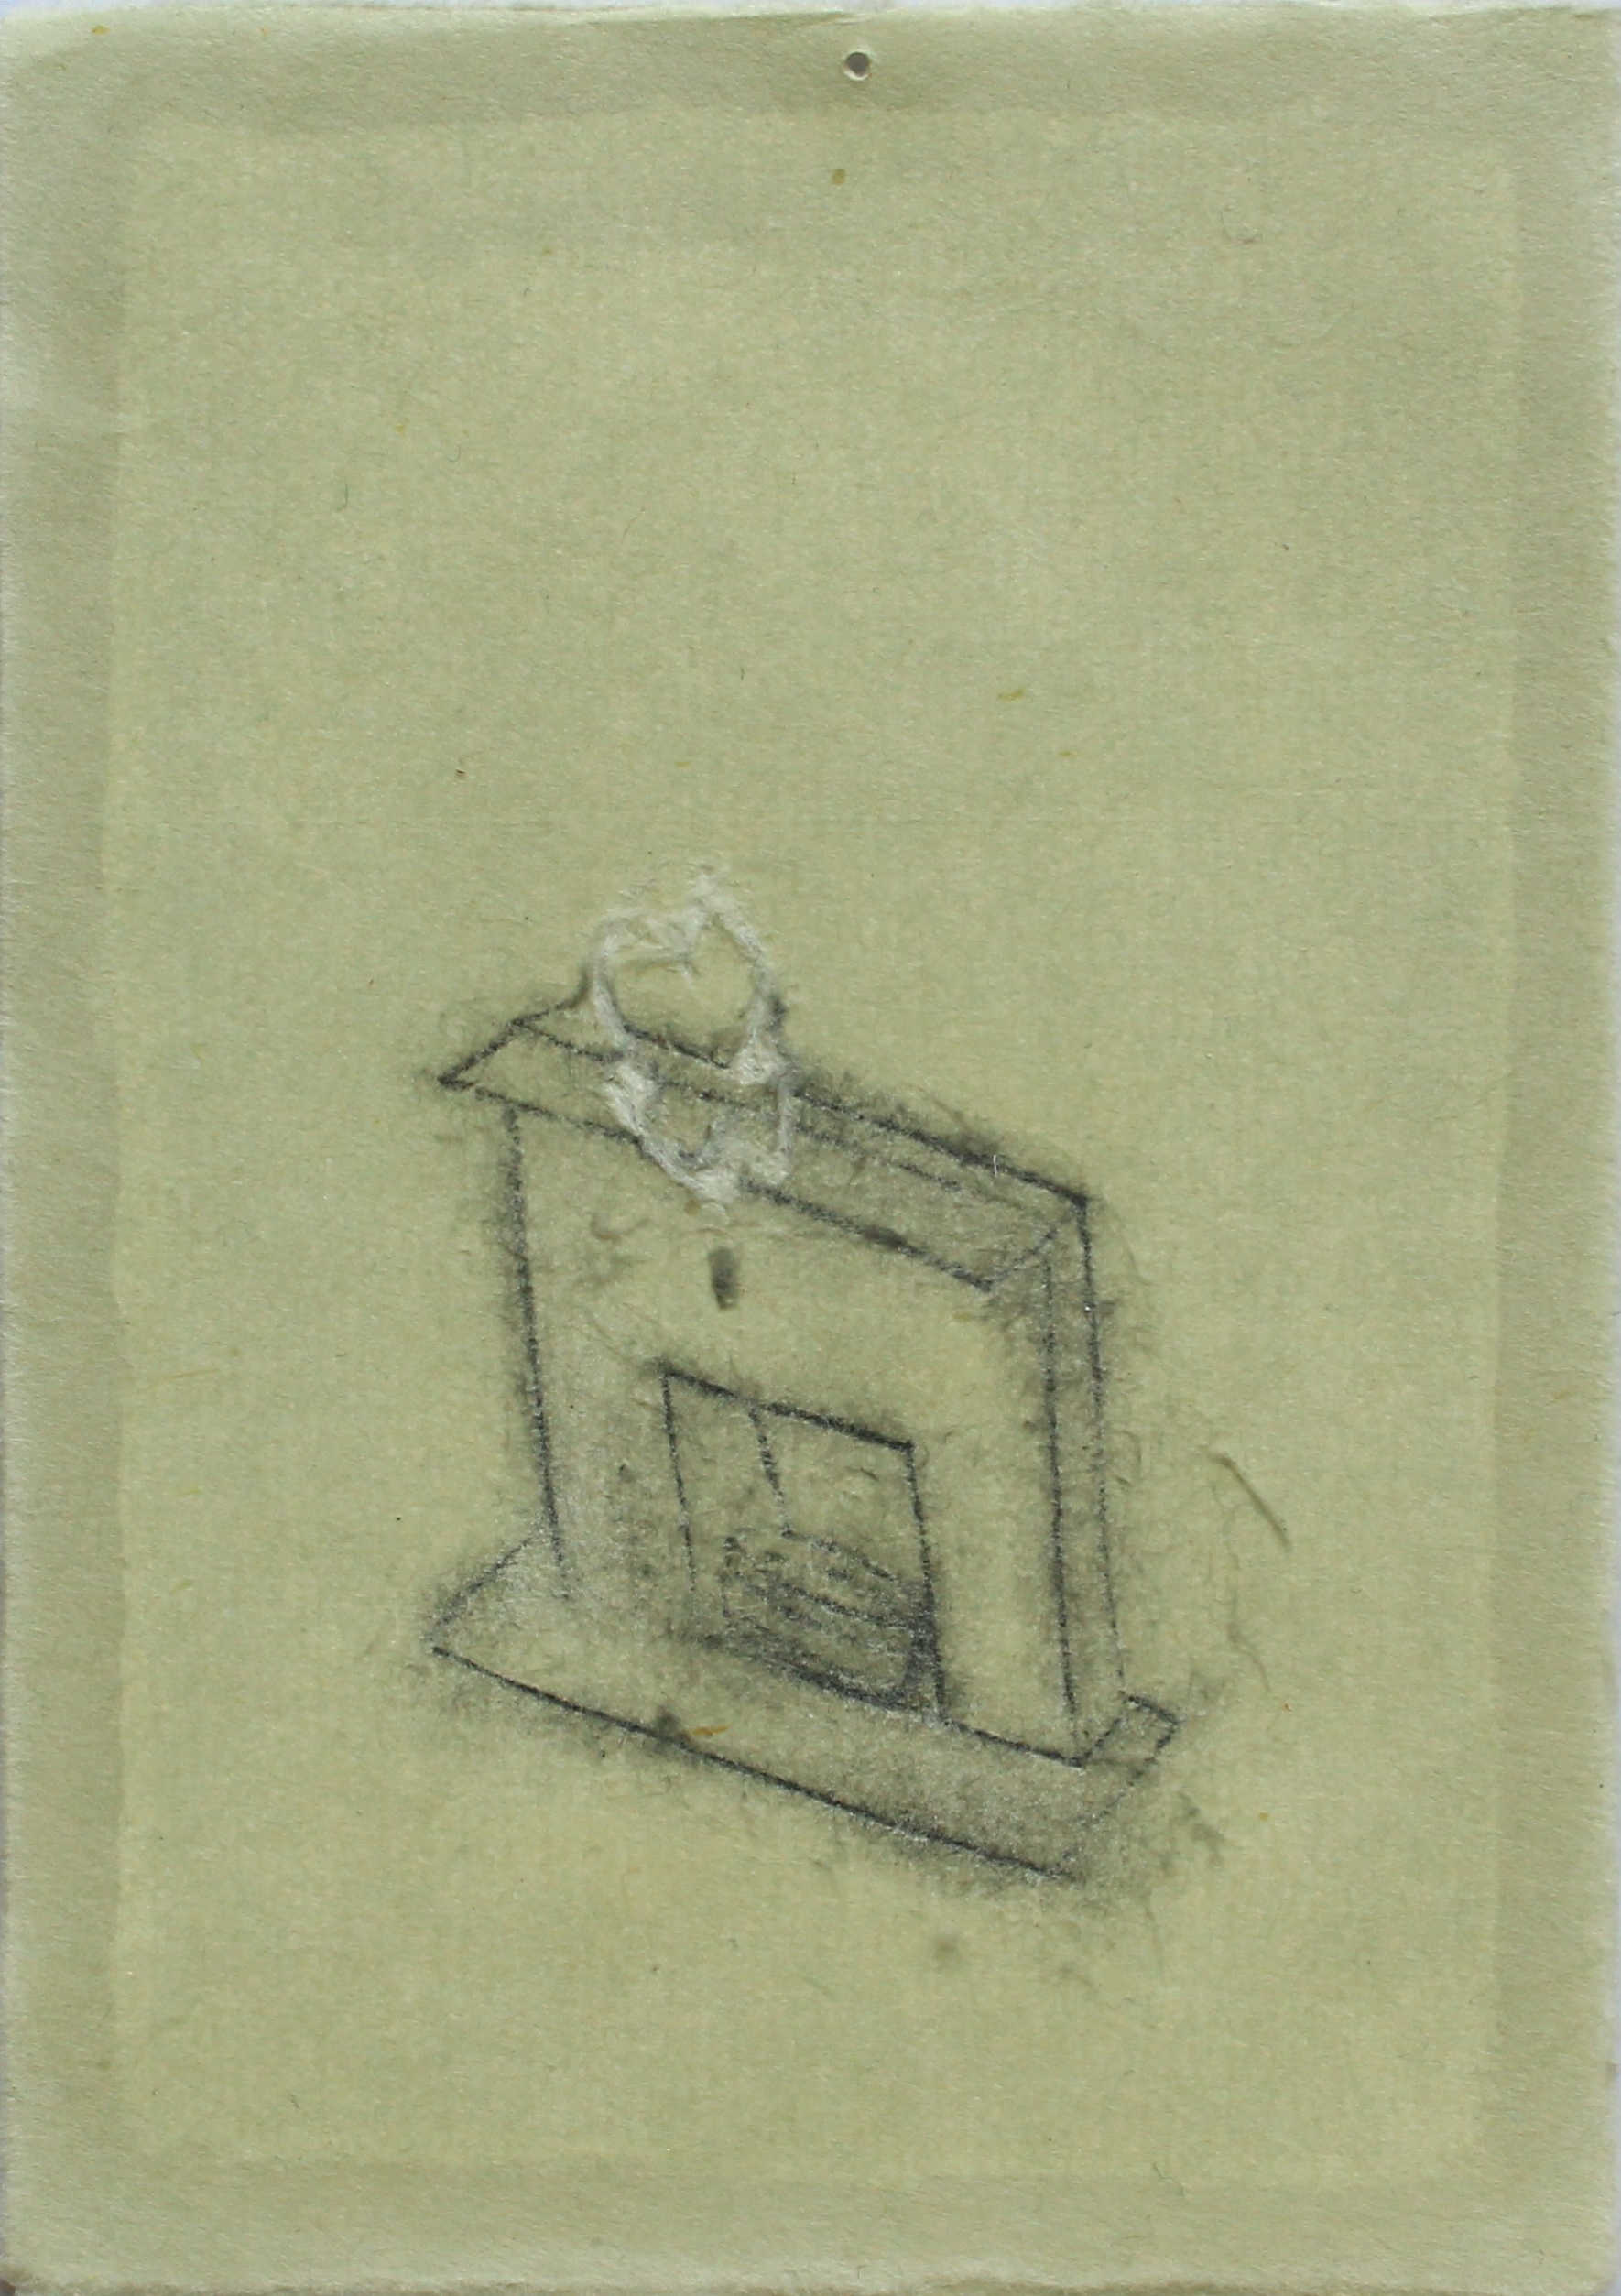 A drawing of an onion skin is placed on a fireplace, the fireplace is drawn with 2B pencil on washi paper, and the skin is white and scratched into the paper.